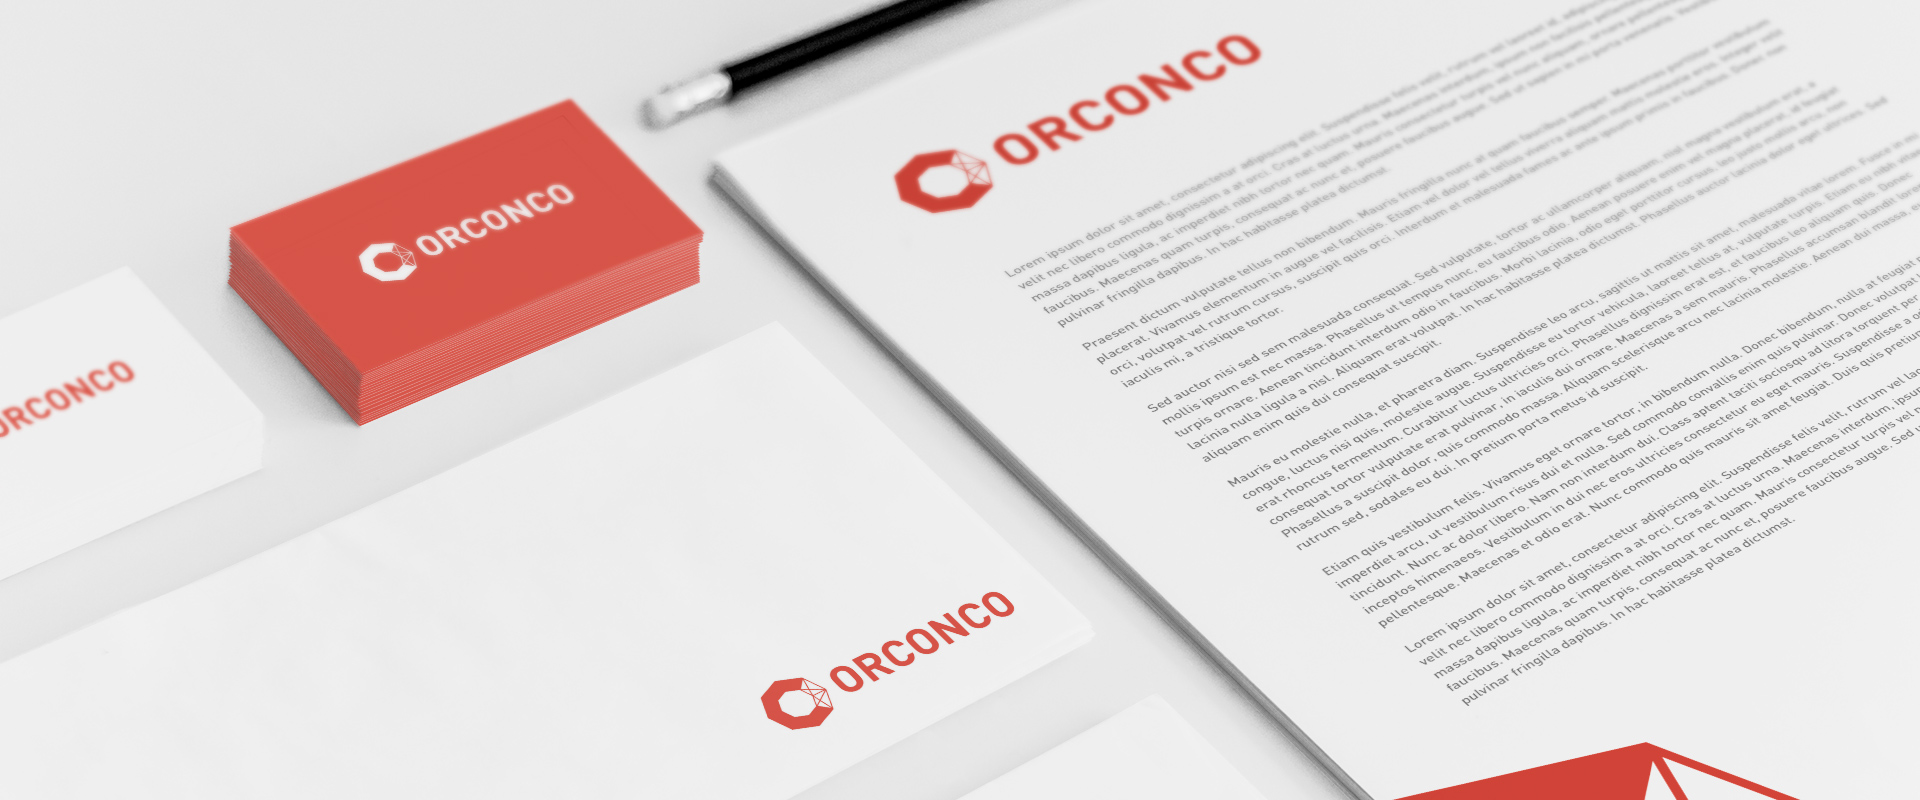 Print stationary design for Orconco